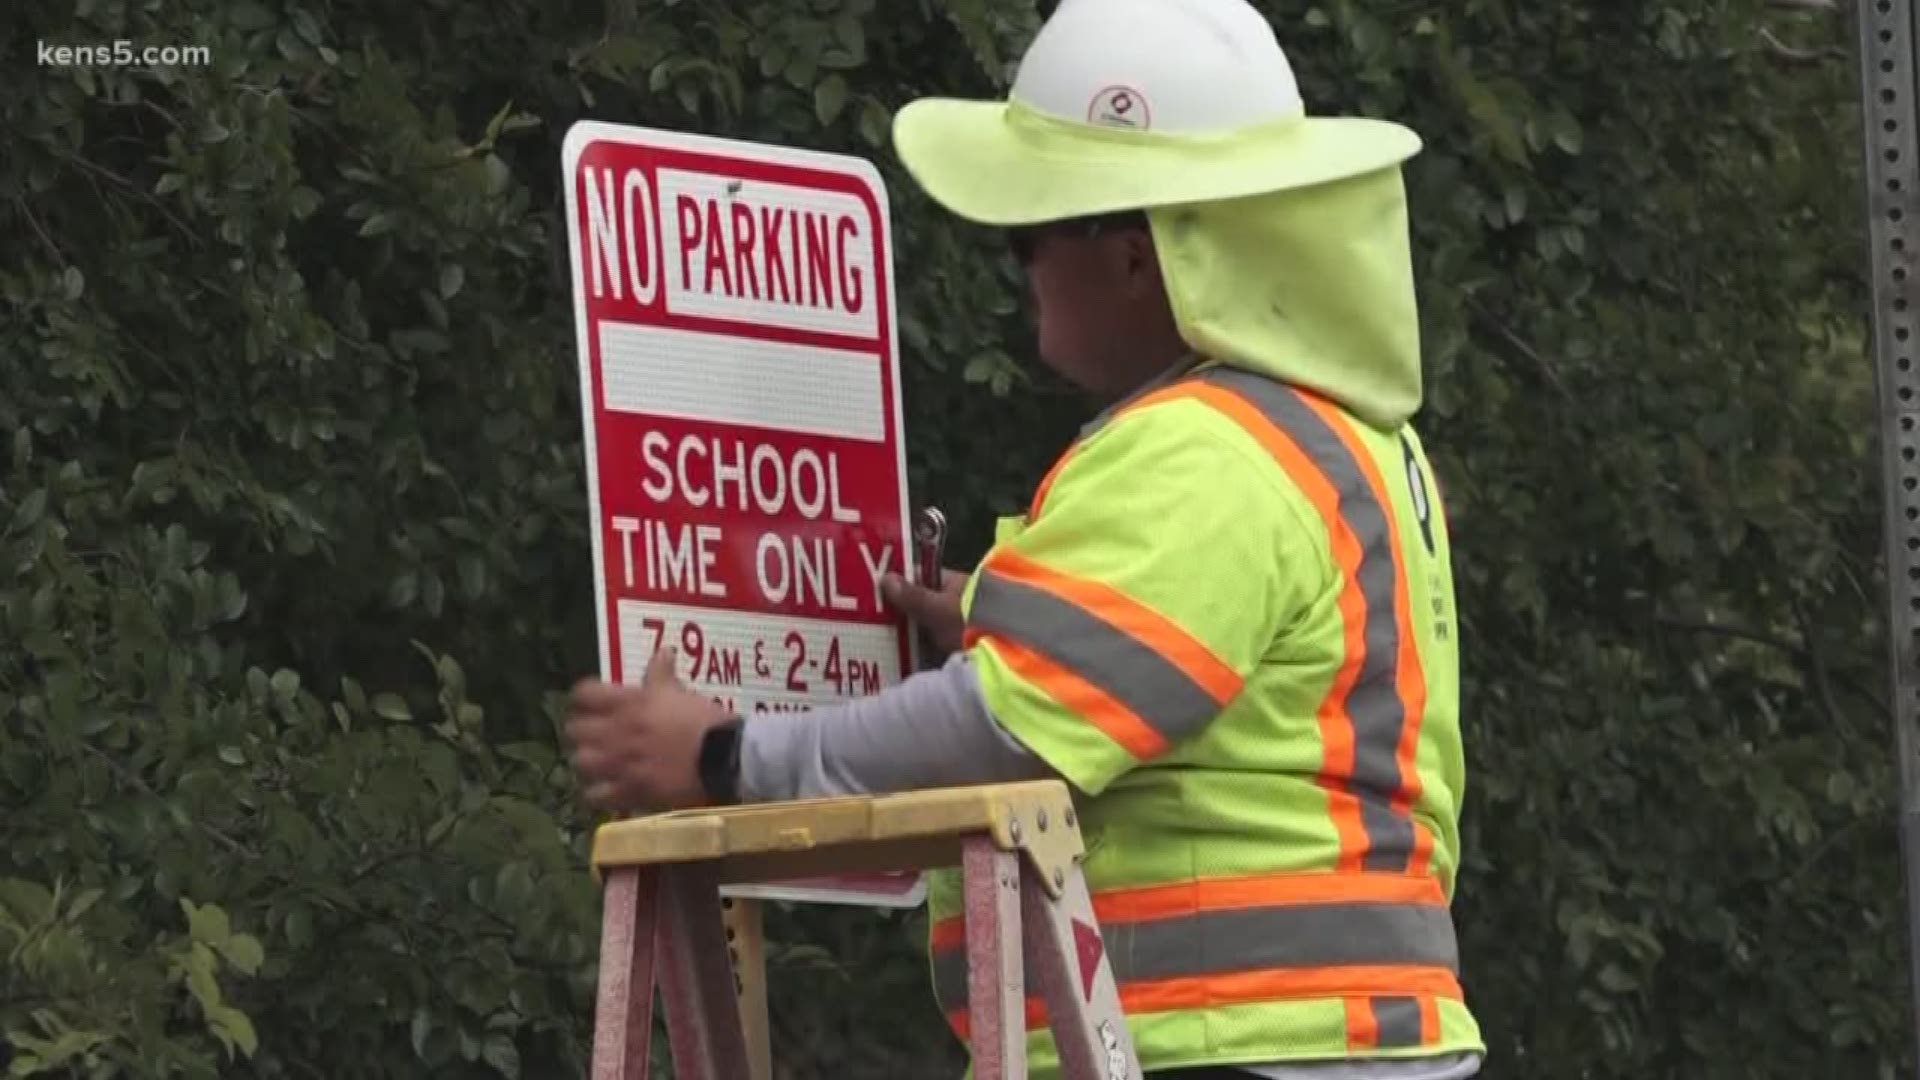 Crosswalks, signage and flashing lights are receiving touch-ups to maximize the safety of the thousands of students starting school on Monday.